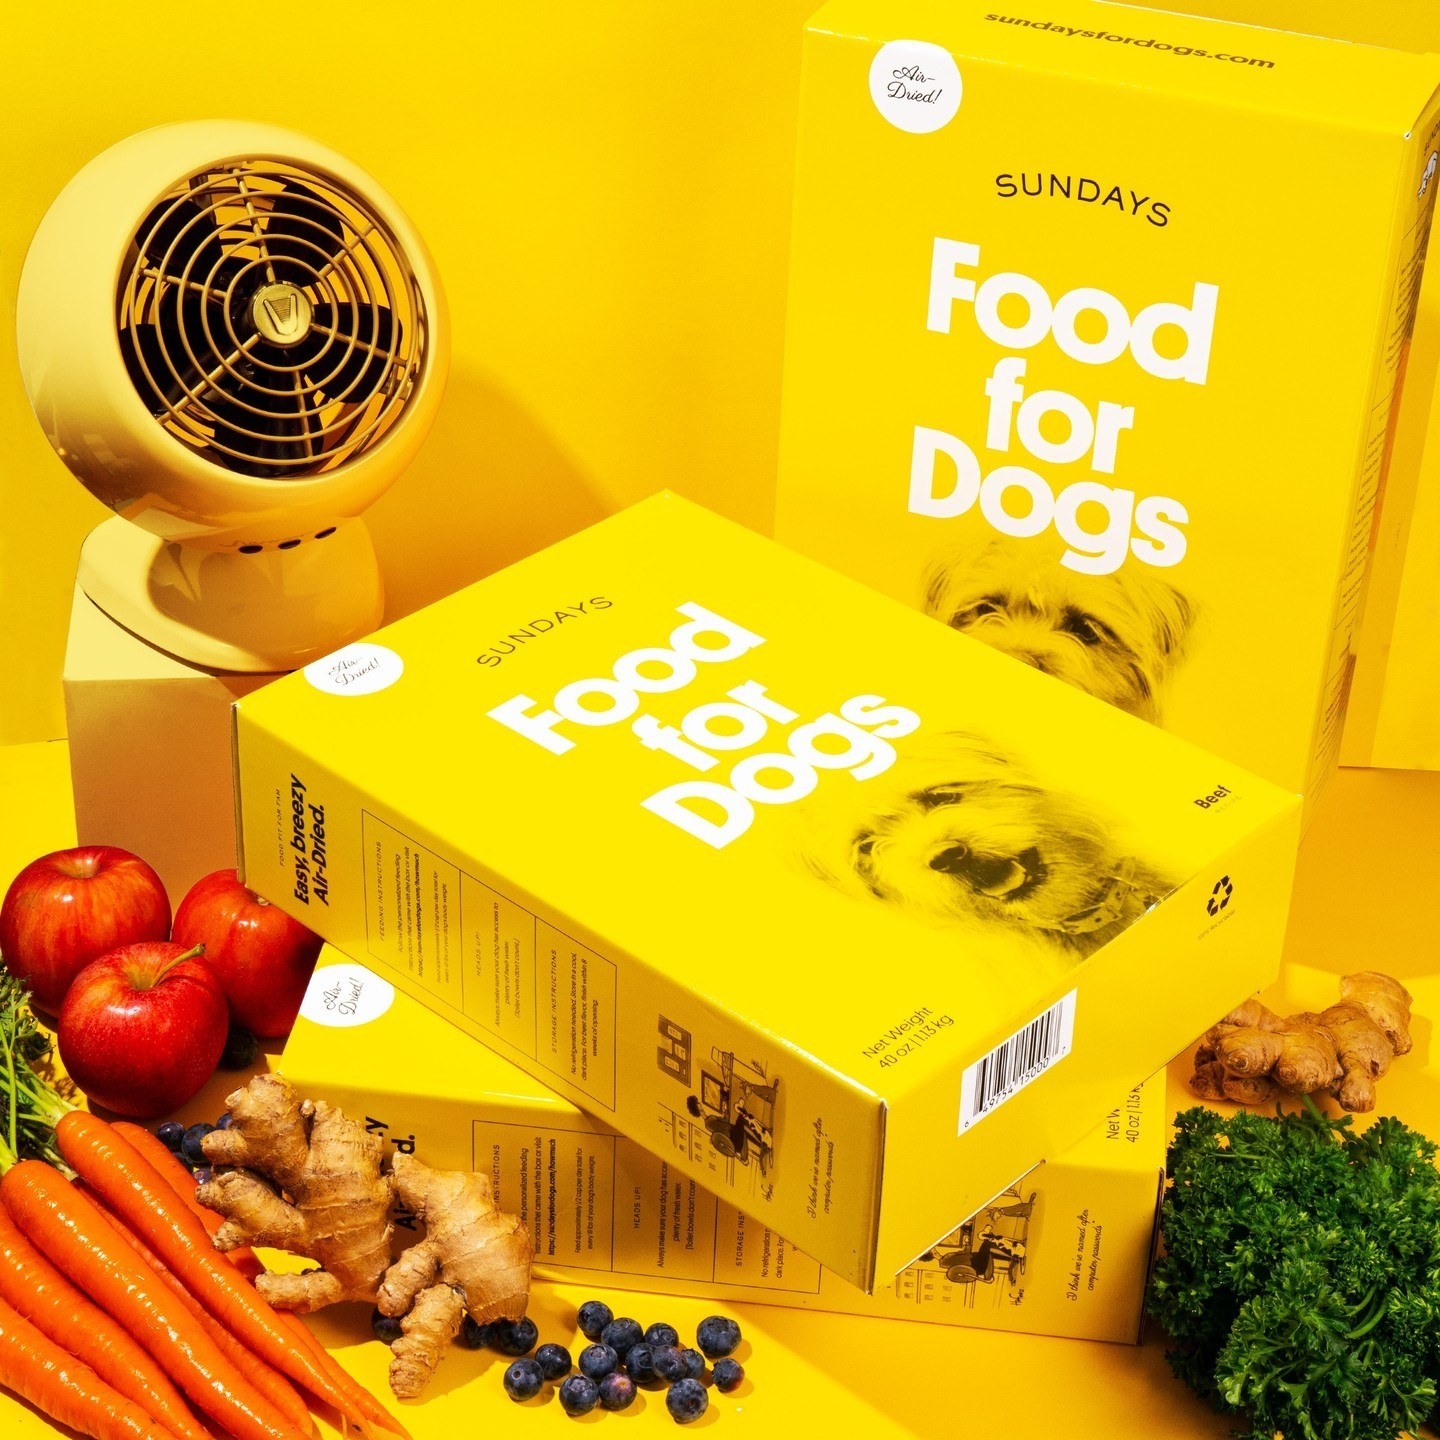 yellow boxes of dog food from Sundays for Dogs next to fruits and veggies